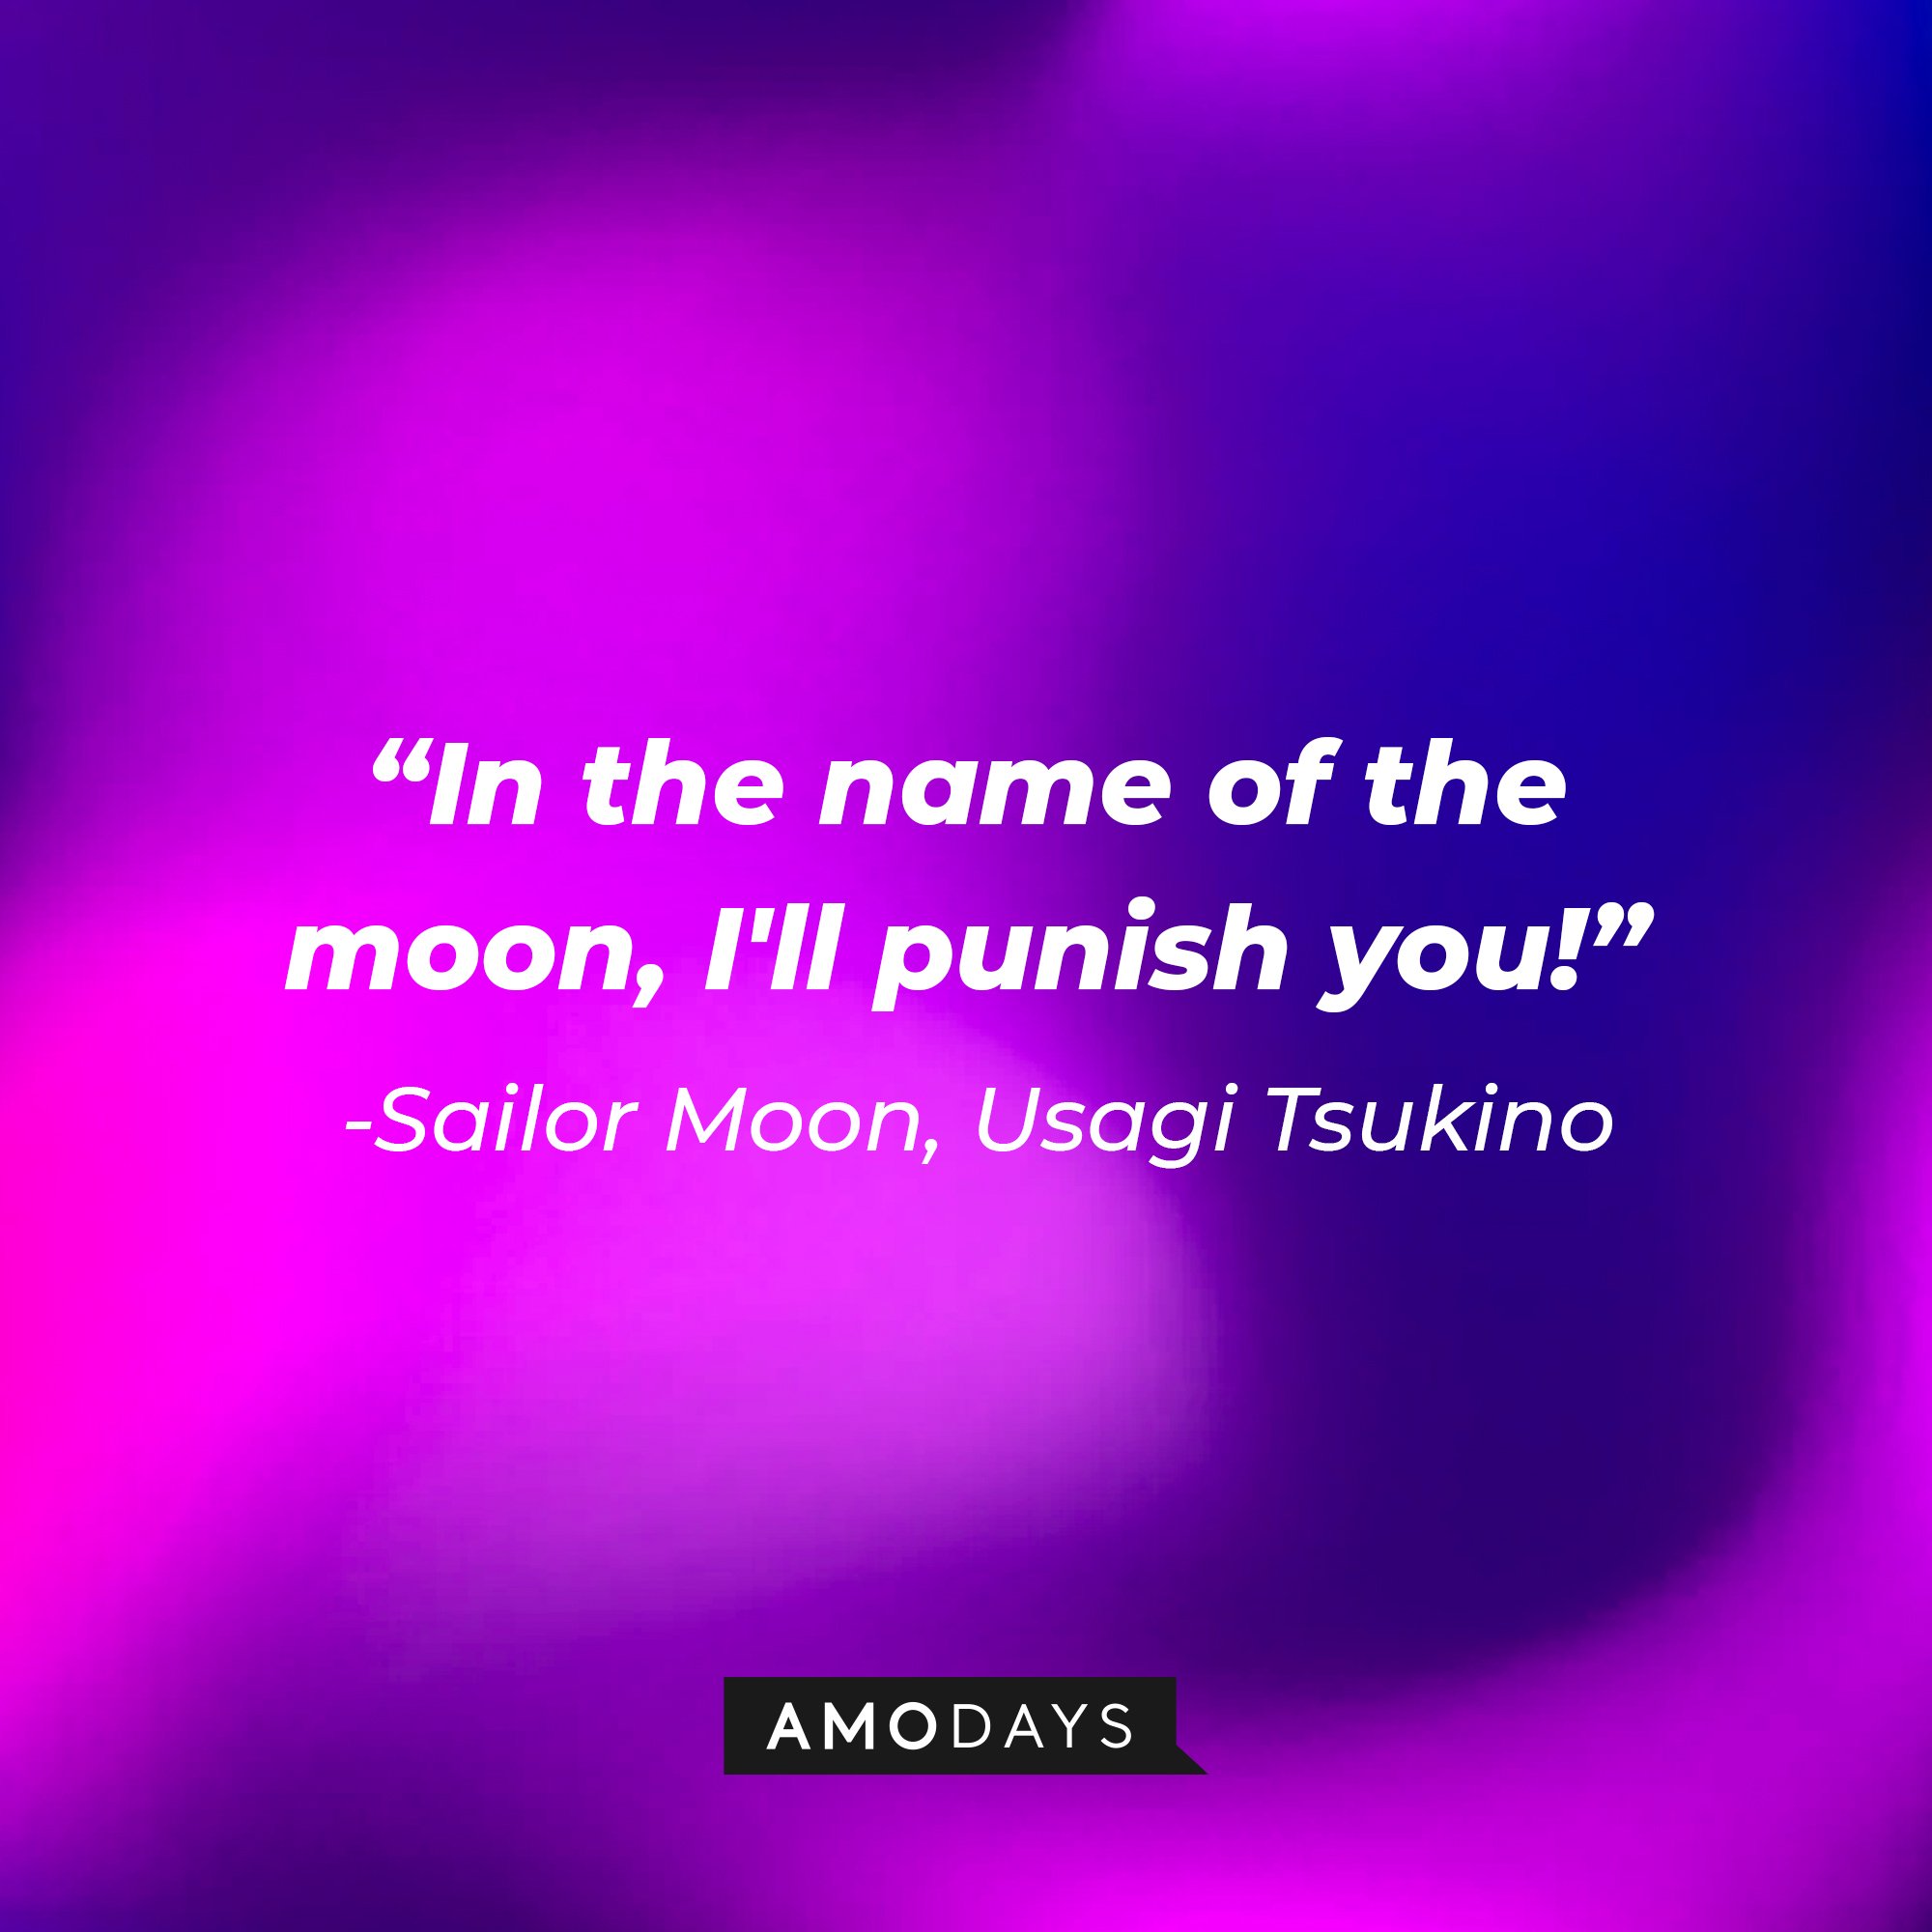 Sailor Moon/Usagi Tsukino’s quote: "In the name of the moon, I'll punish you!"  | Image: AmoDays